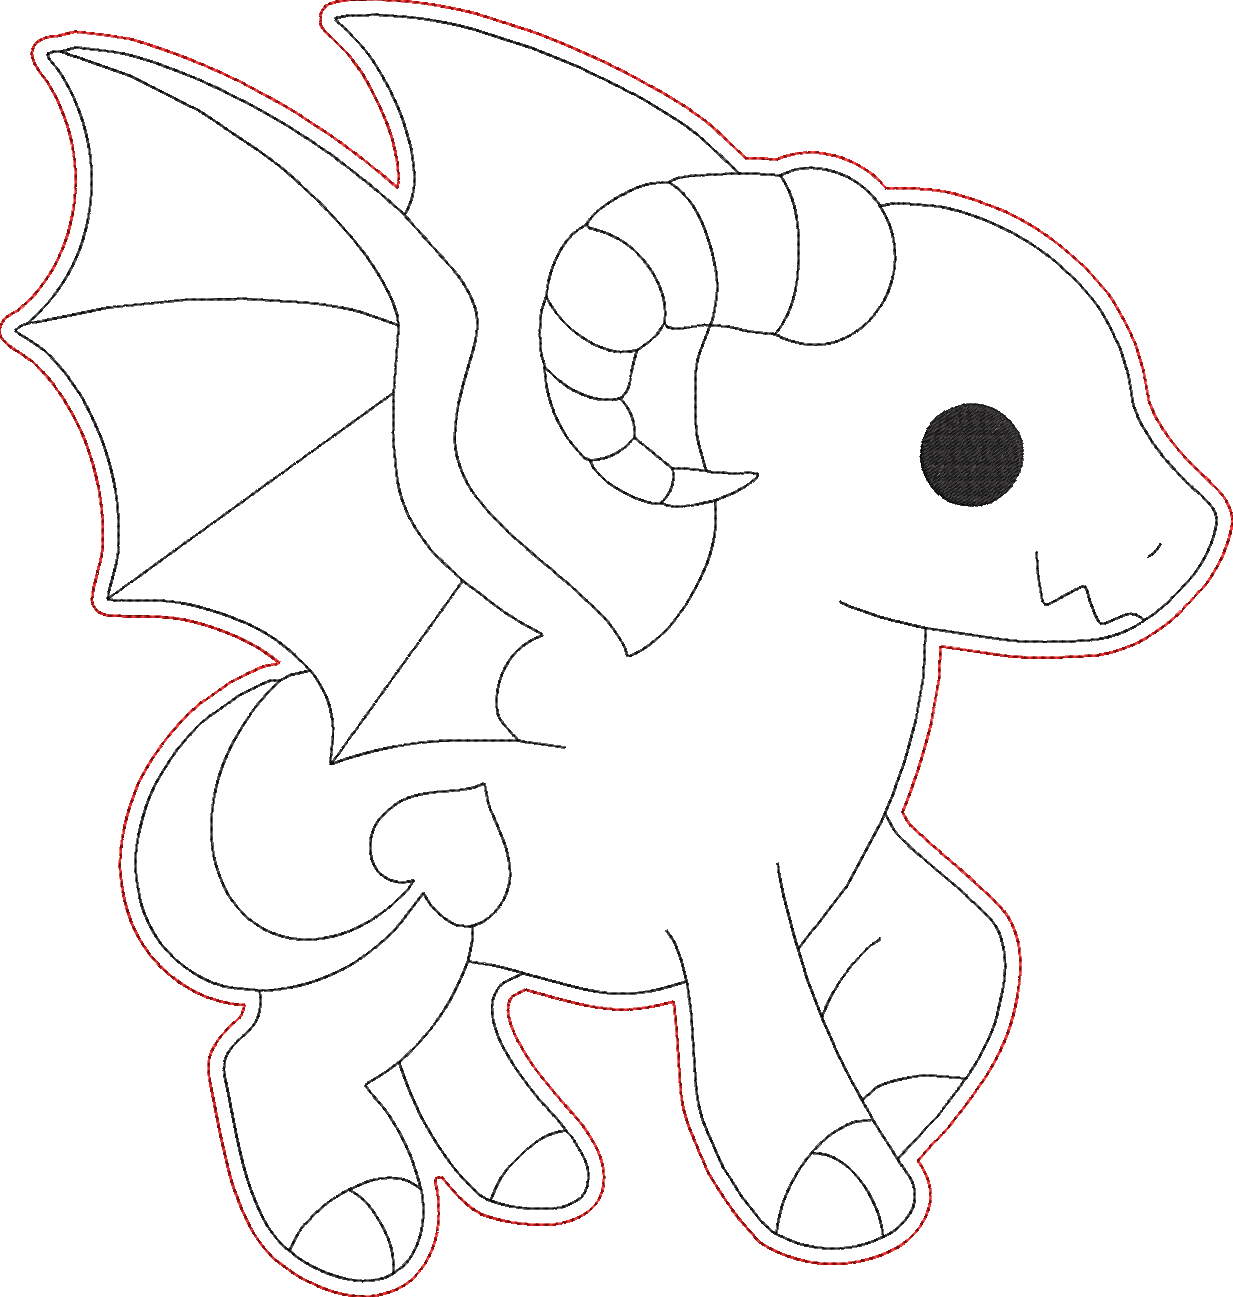 Cute Cryptid Coloring Dolls - Jersey devil Embroidery Design